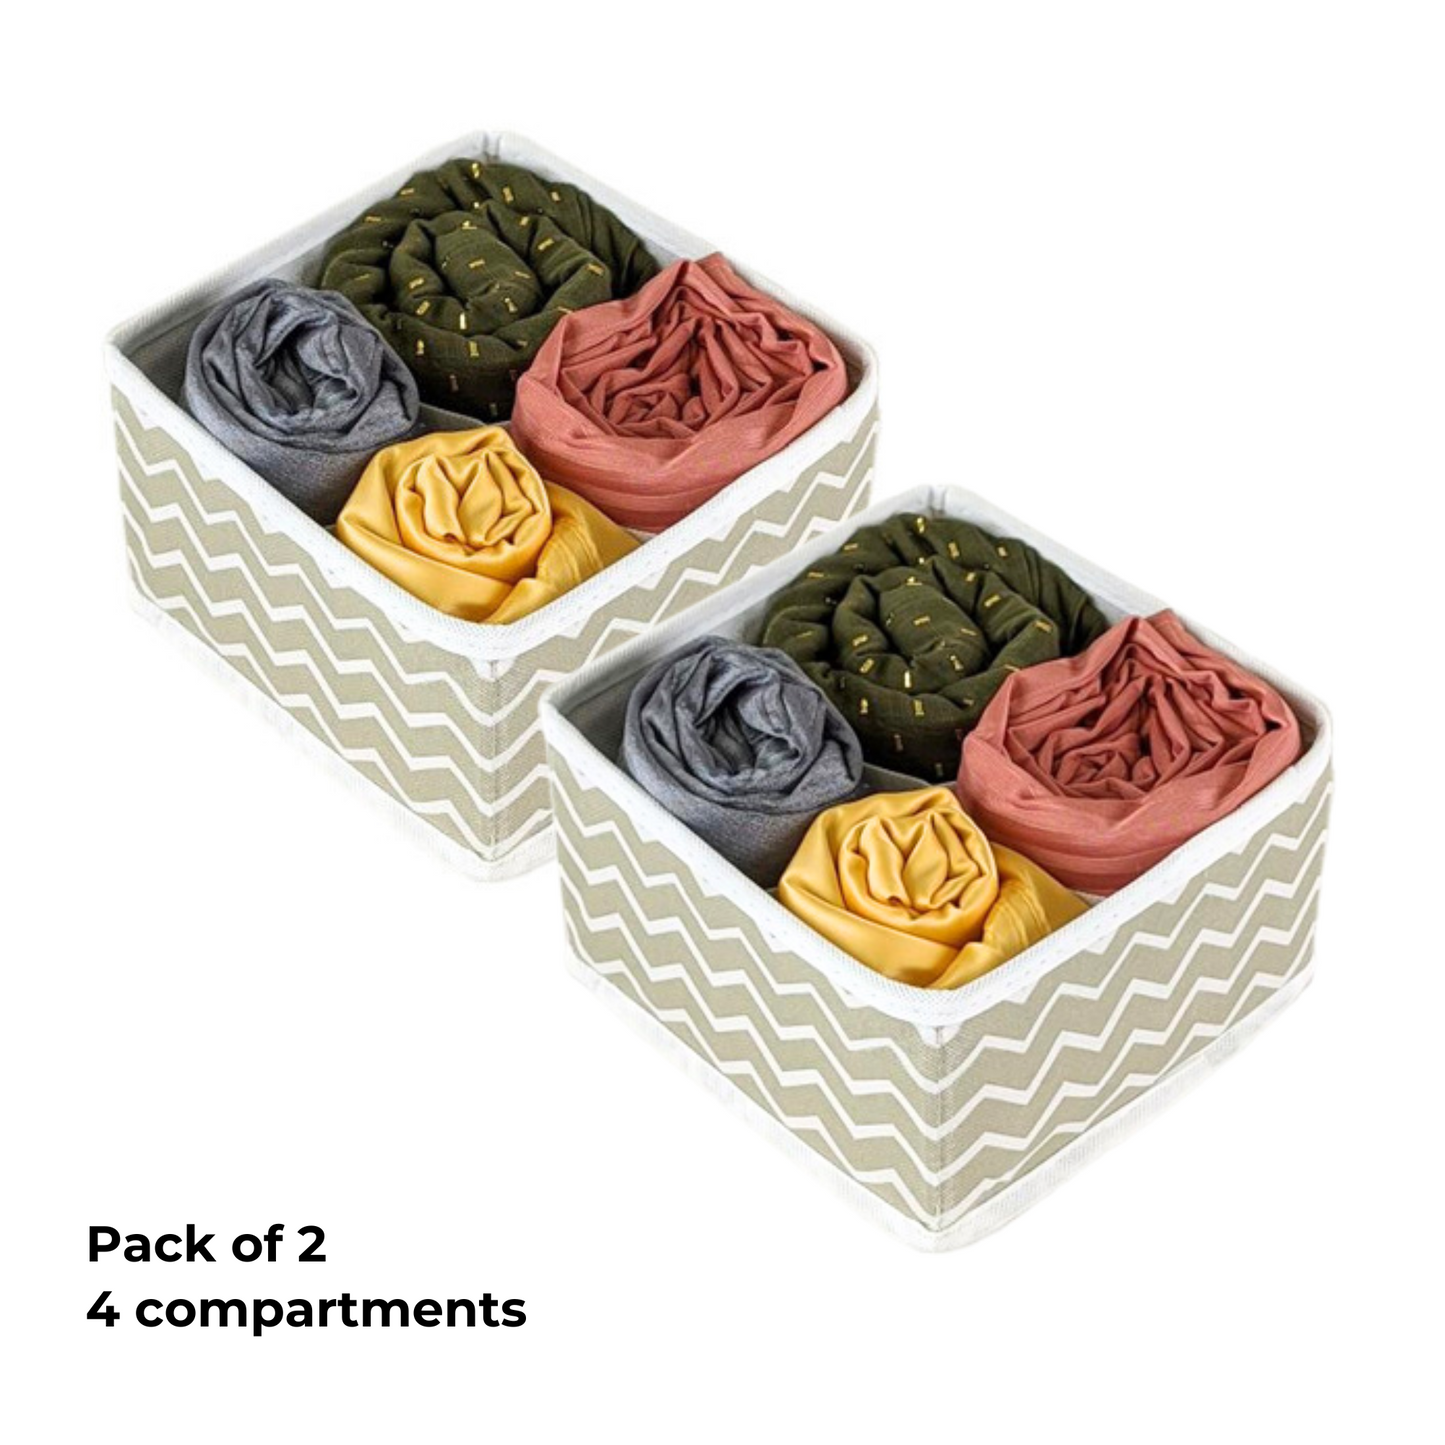 Qoolish Pack of 2 Hijab Haven 4 Compartment Organizers!